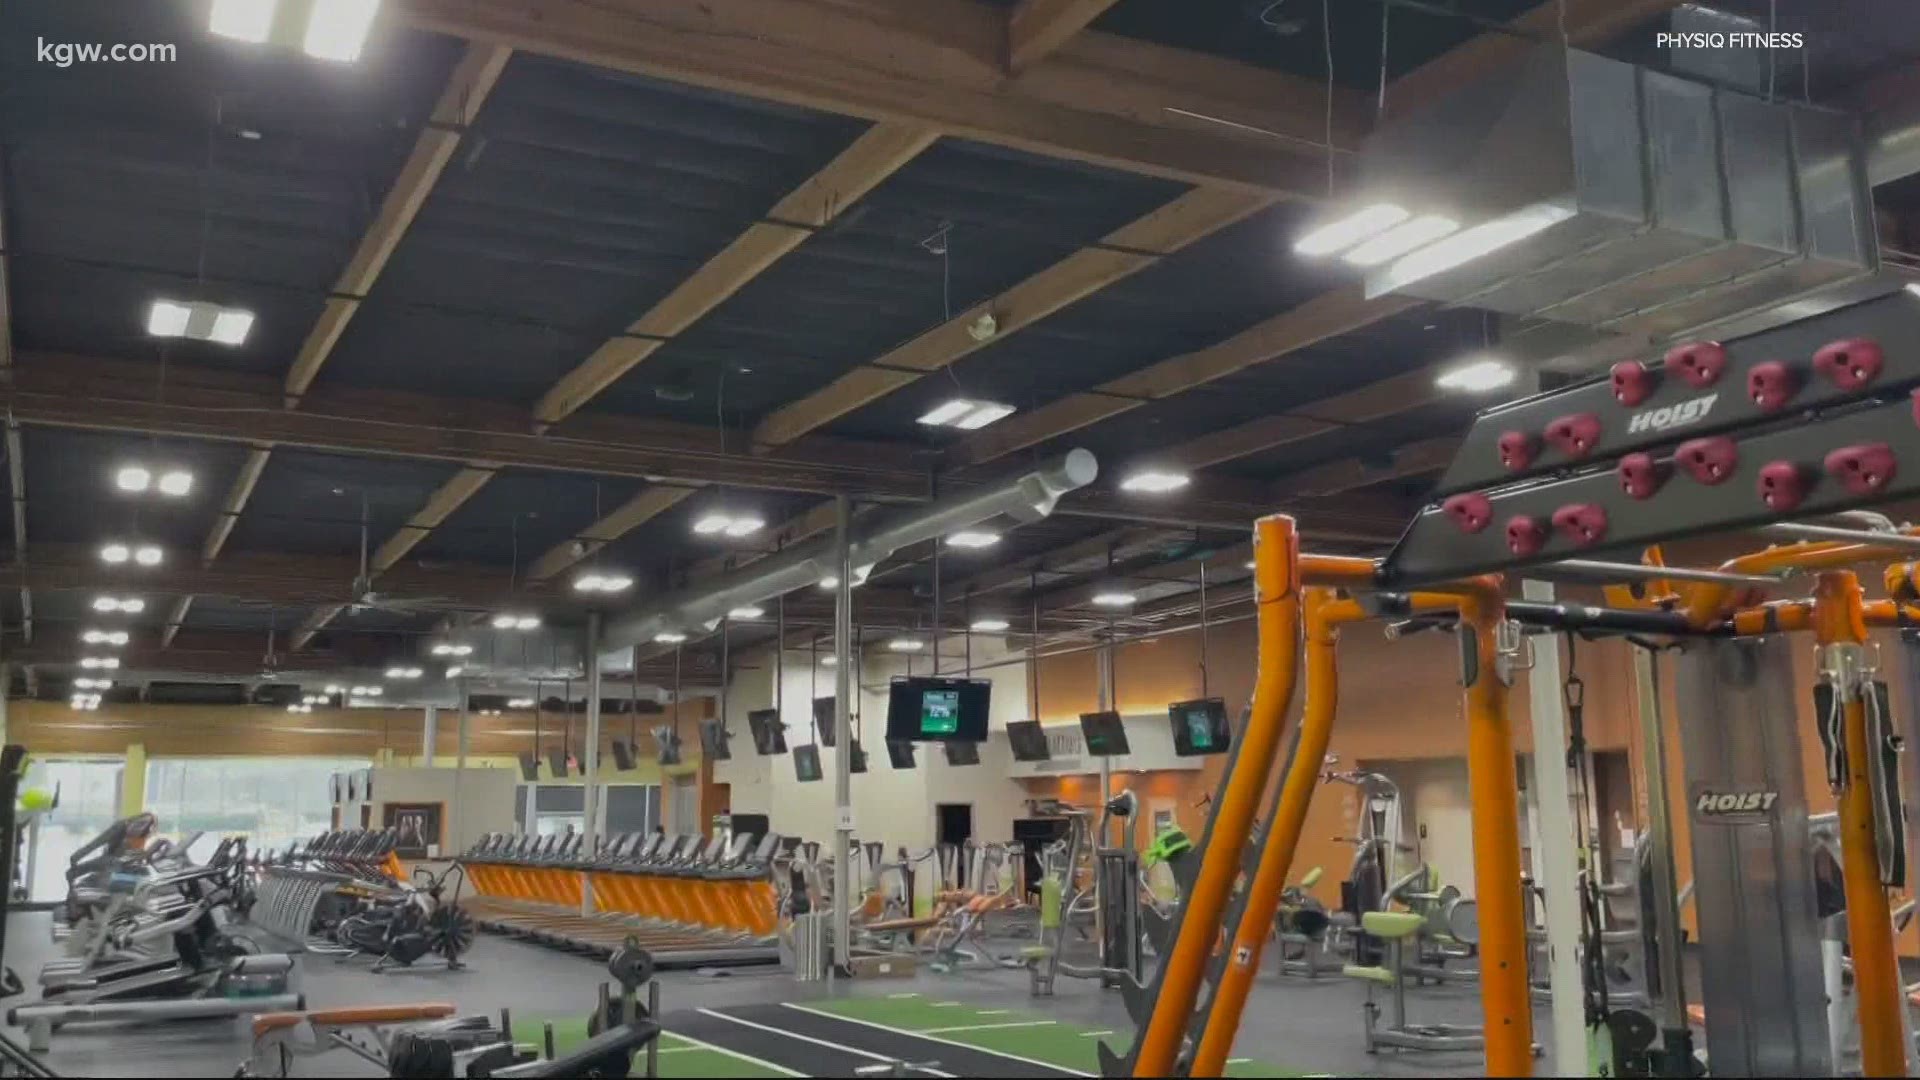 Gym owners react to new COVID-19 guidelines that allow extremely limited indoor workouts.